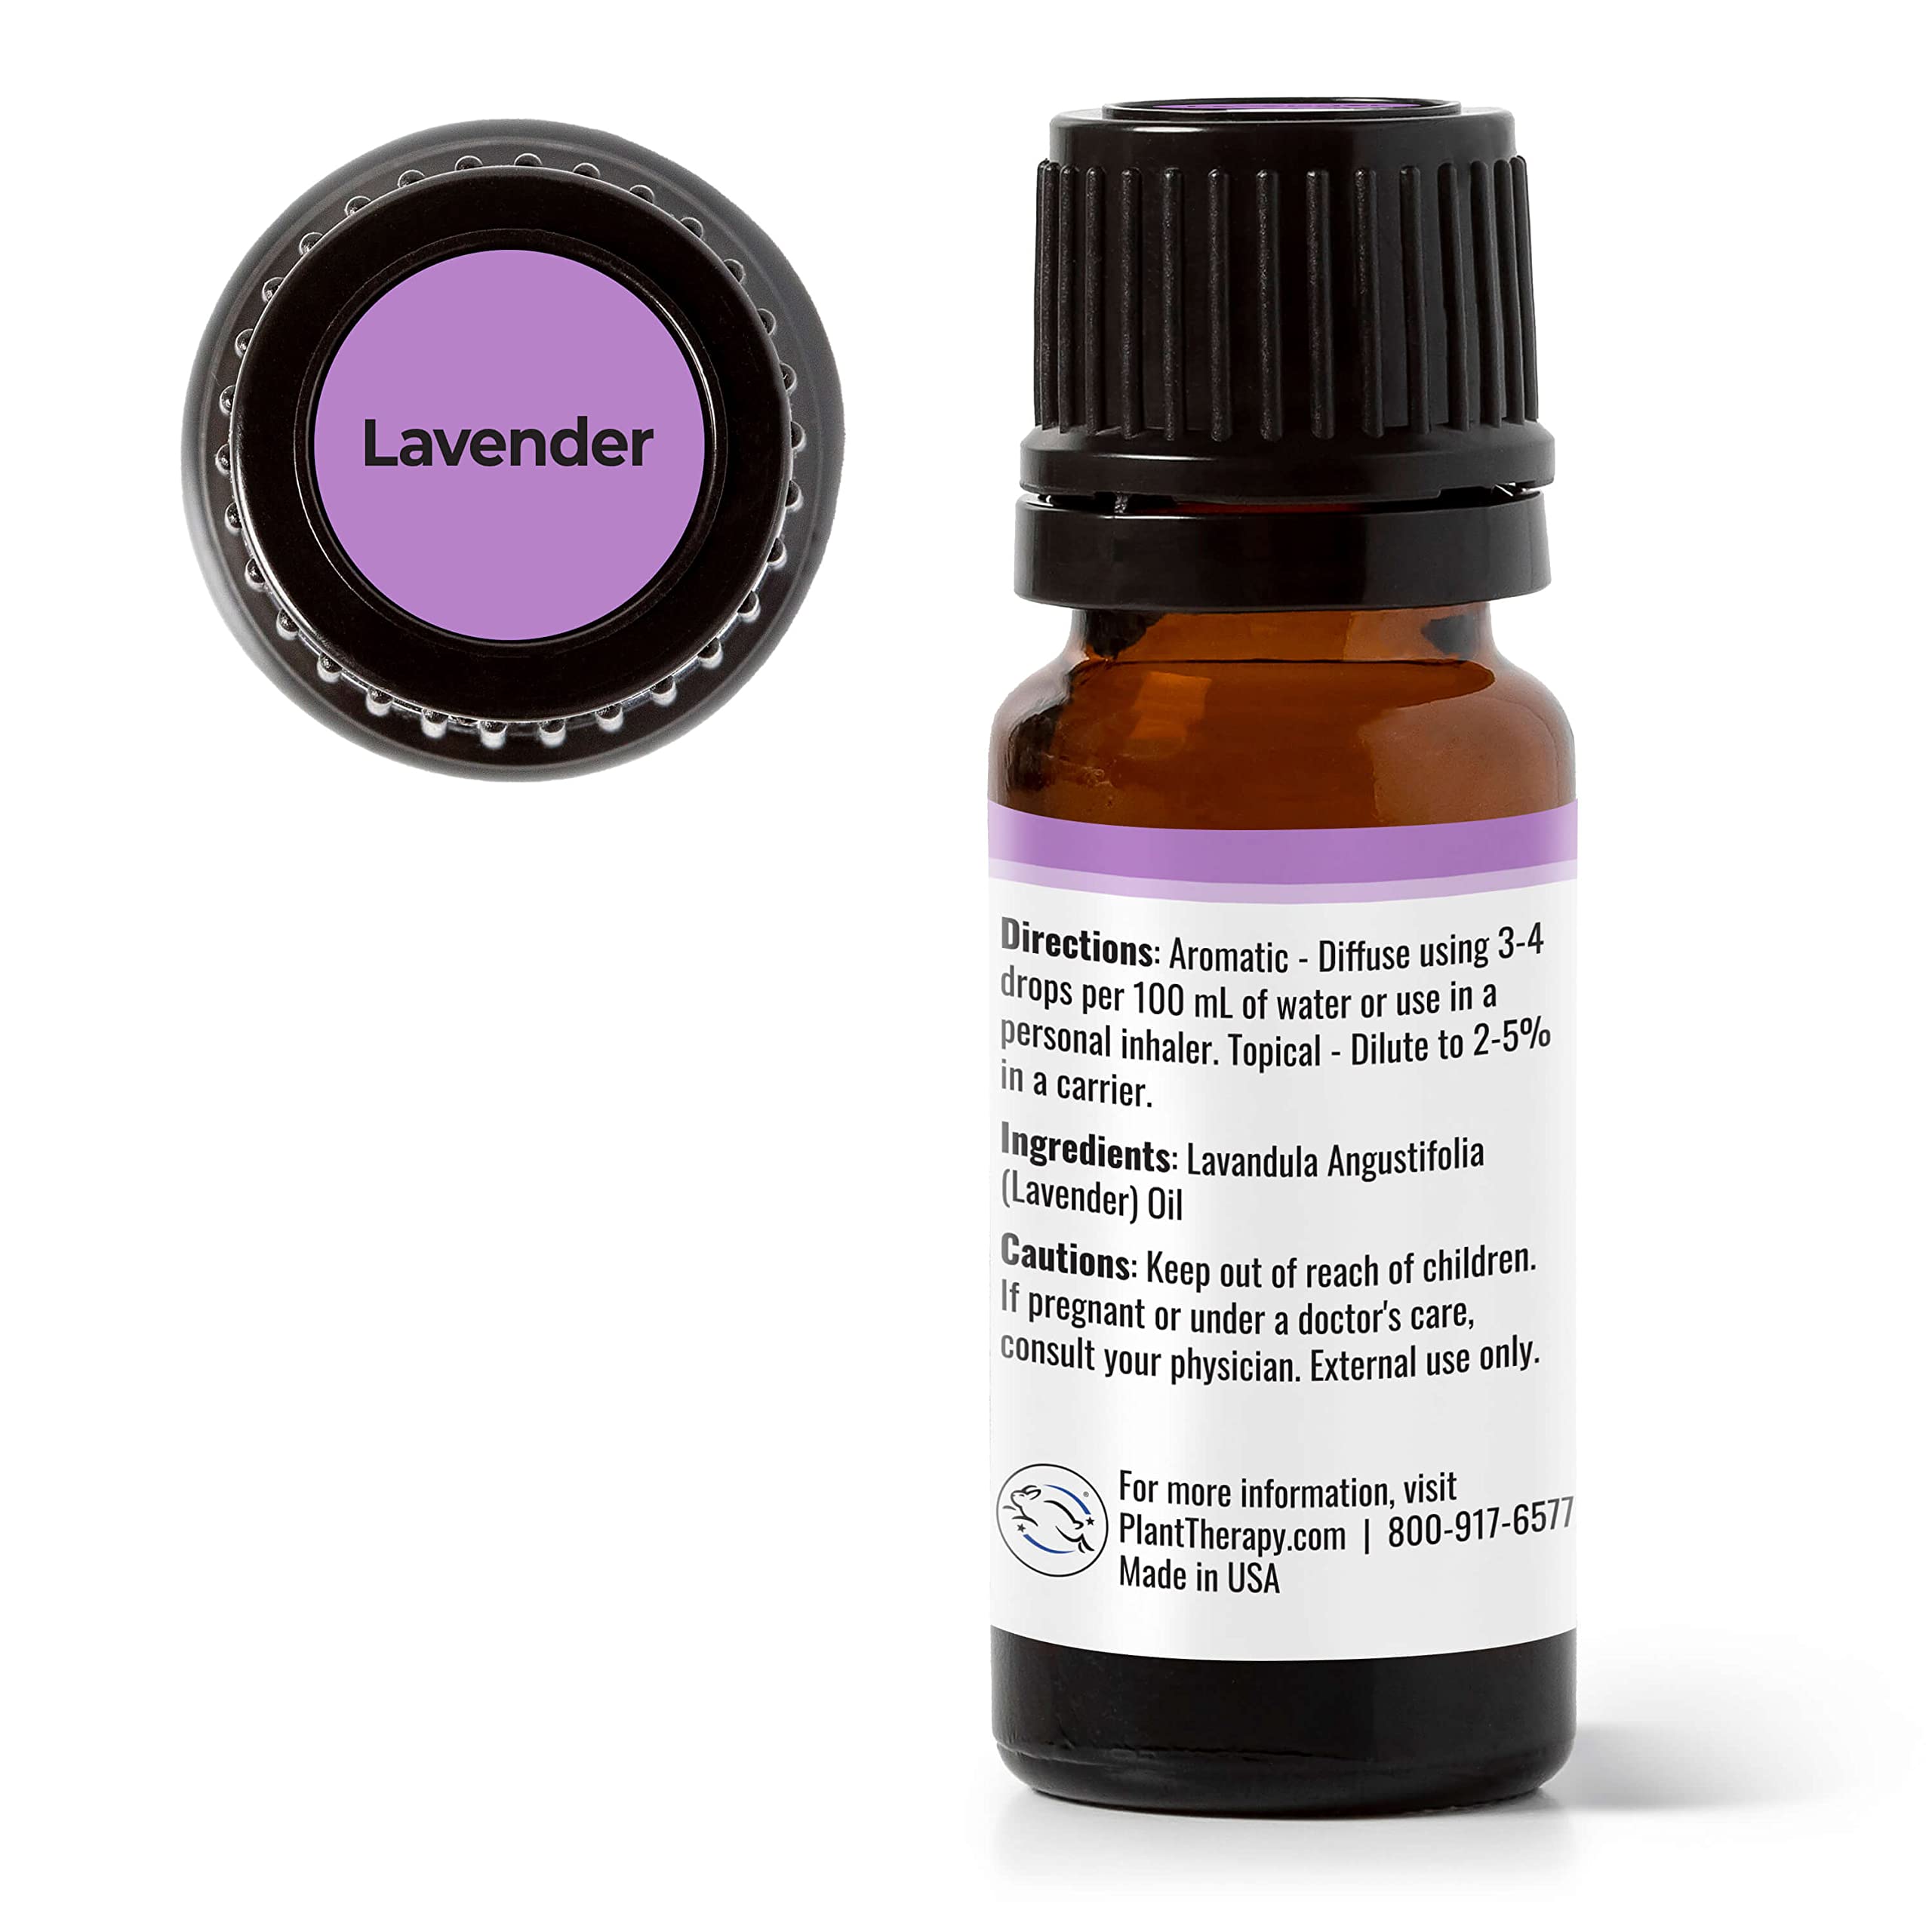 Plant Therapy Lavender Essential Oil 100% Pure, Undiluted, Therapeutic Grade, Aromatherapy Diffuser for Relaxation and Body Care, Healthy Skin and Hair, 10 mL (1/3 oz)